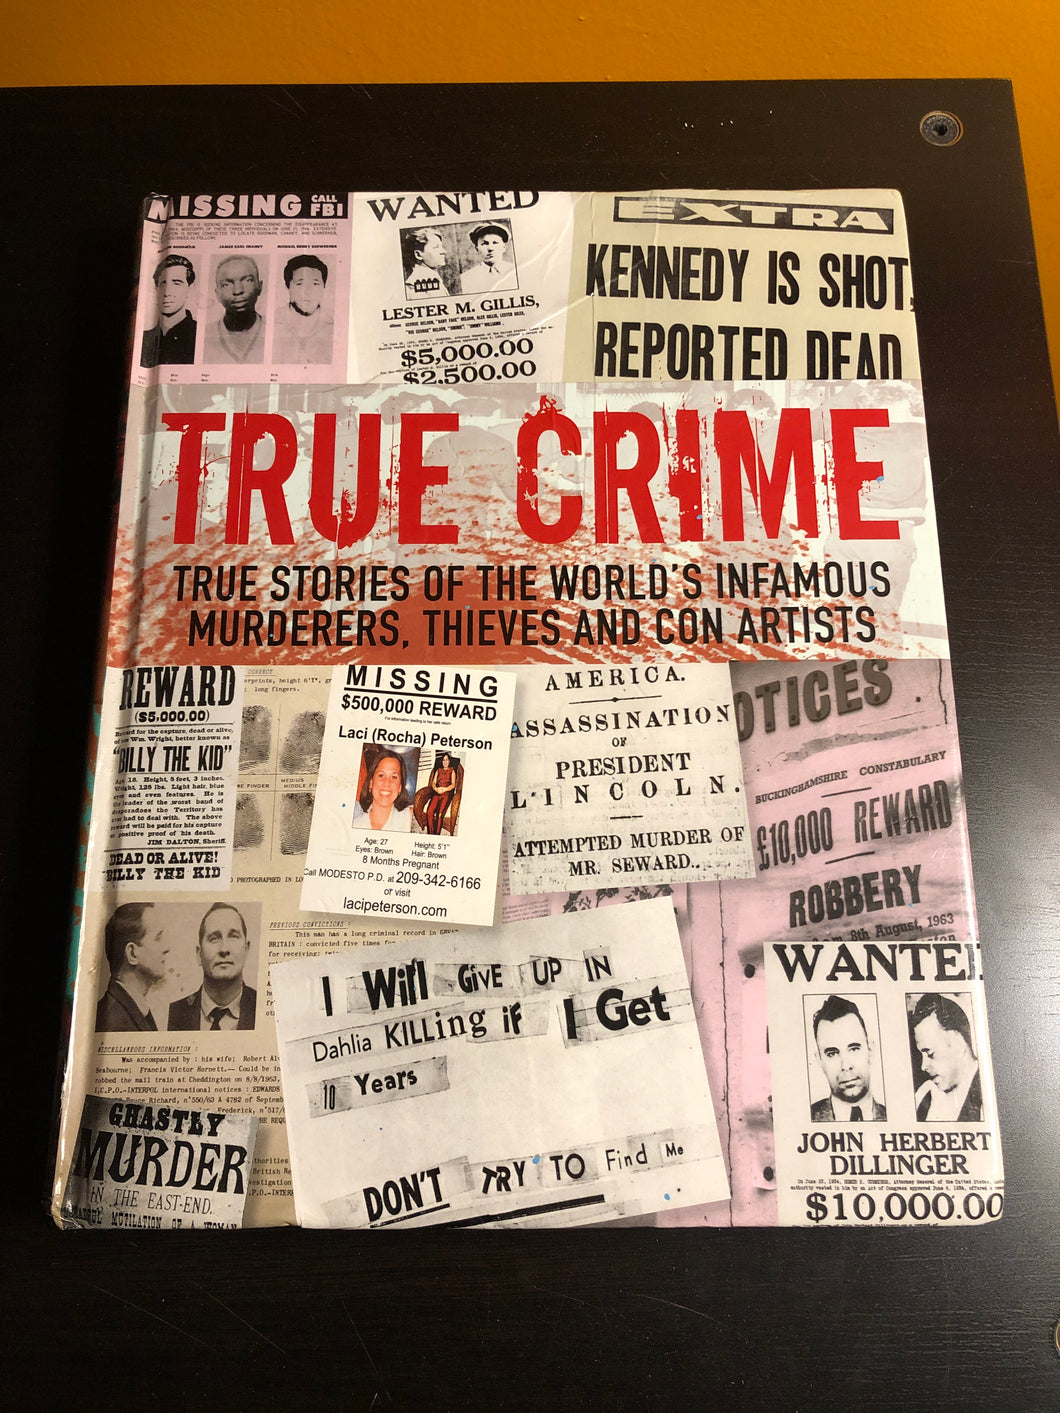 True Crime: True Stories of the World's Infamous Murderers, Thieves and Con Artists